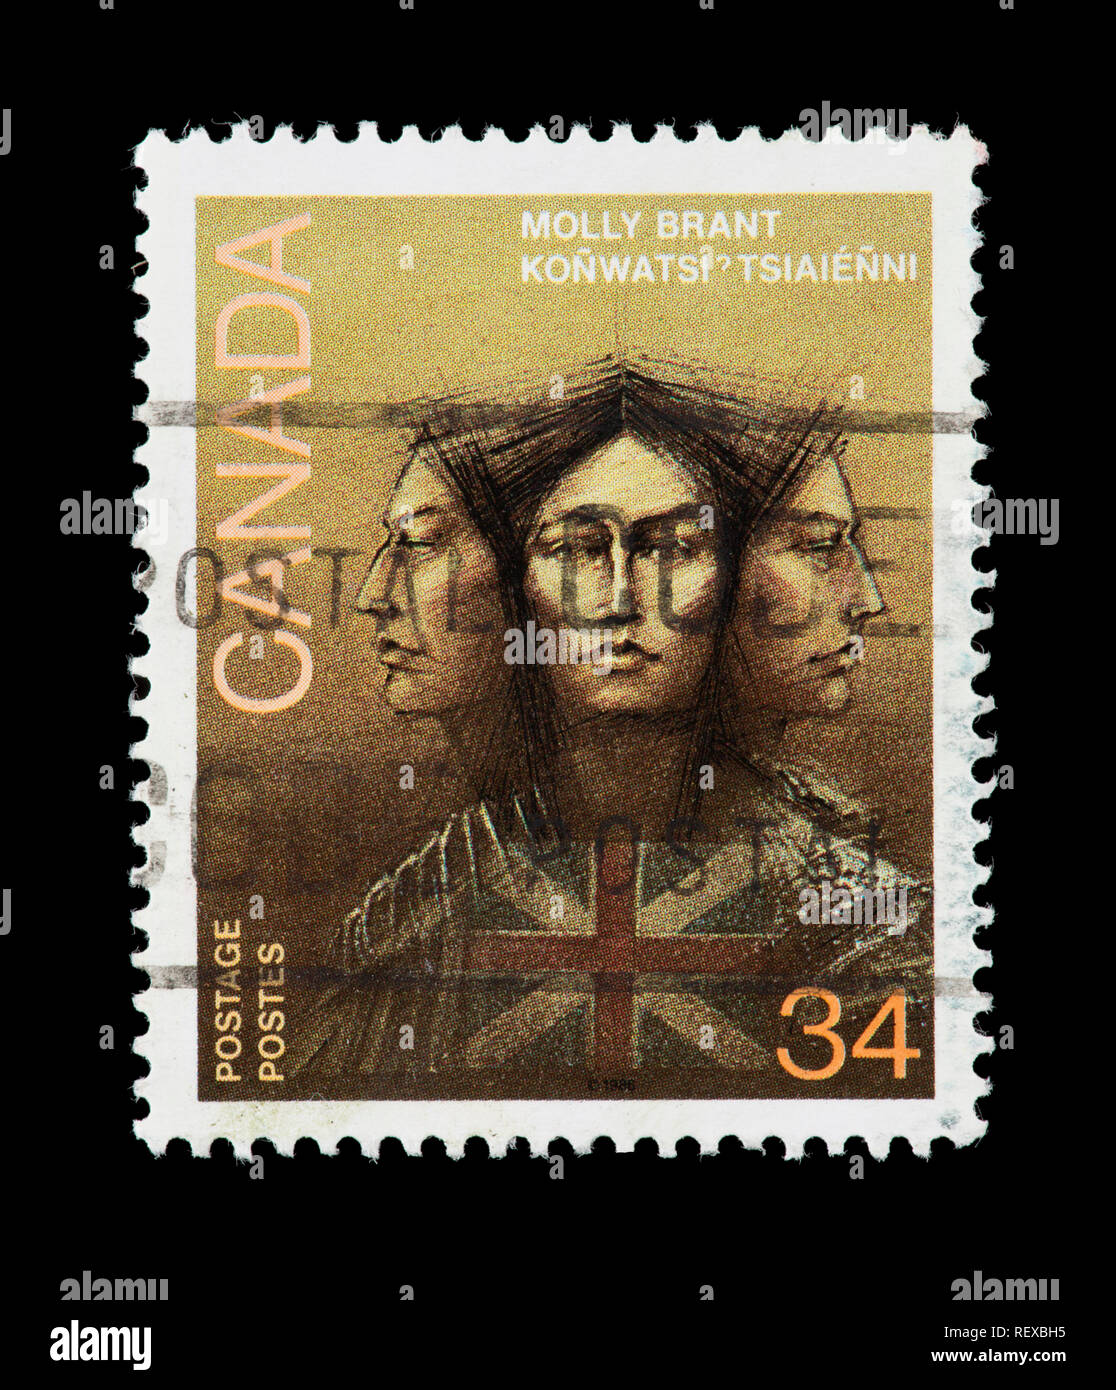 postage stam pfrom Canada depicting Molly Brant, Iroquois leader and loyalist Stock Photo